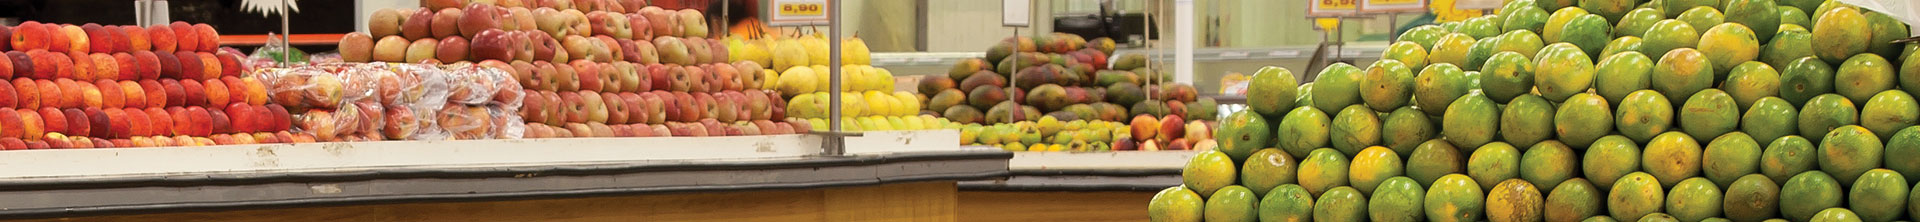 Fruit in a grocery store